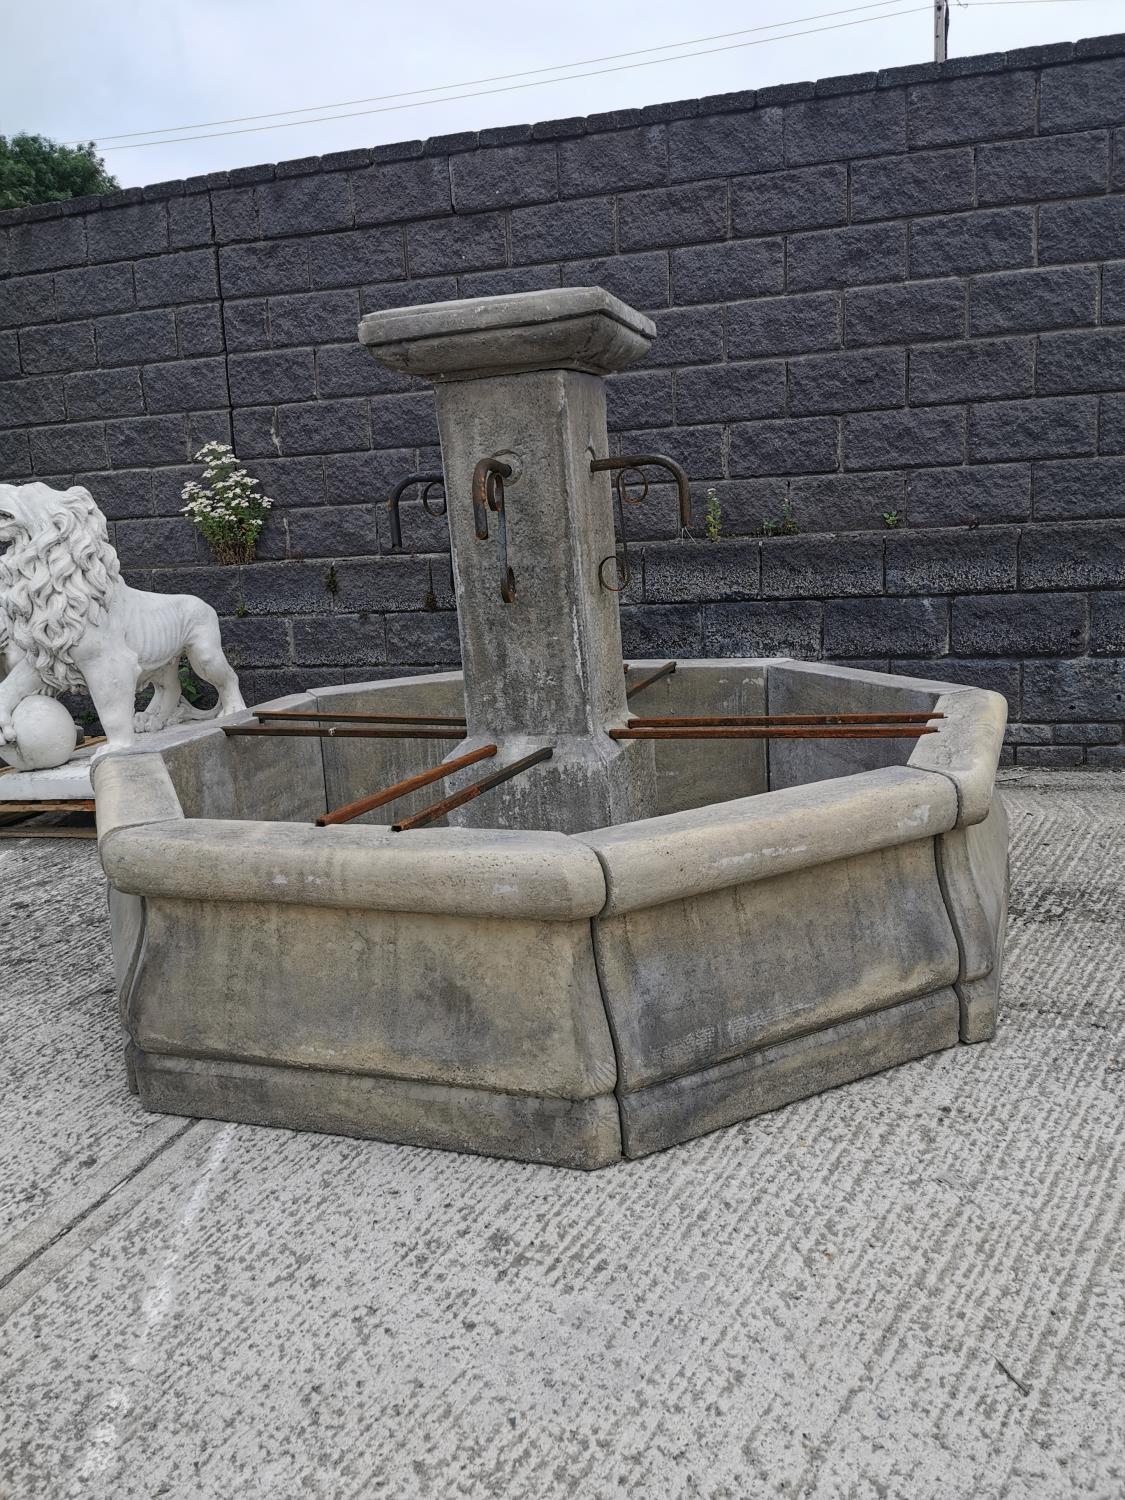 Moulded stone Portuguese fountain with surround.